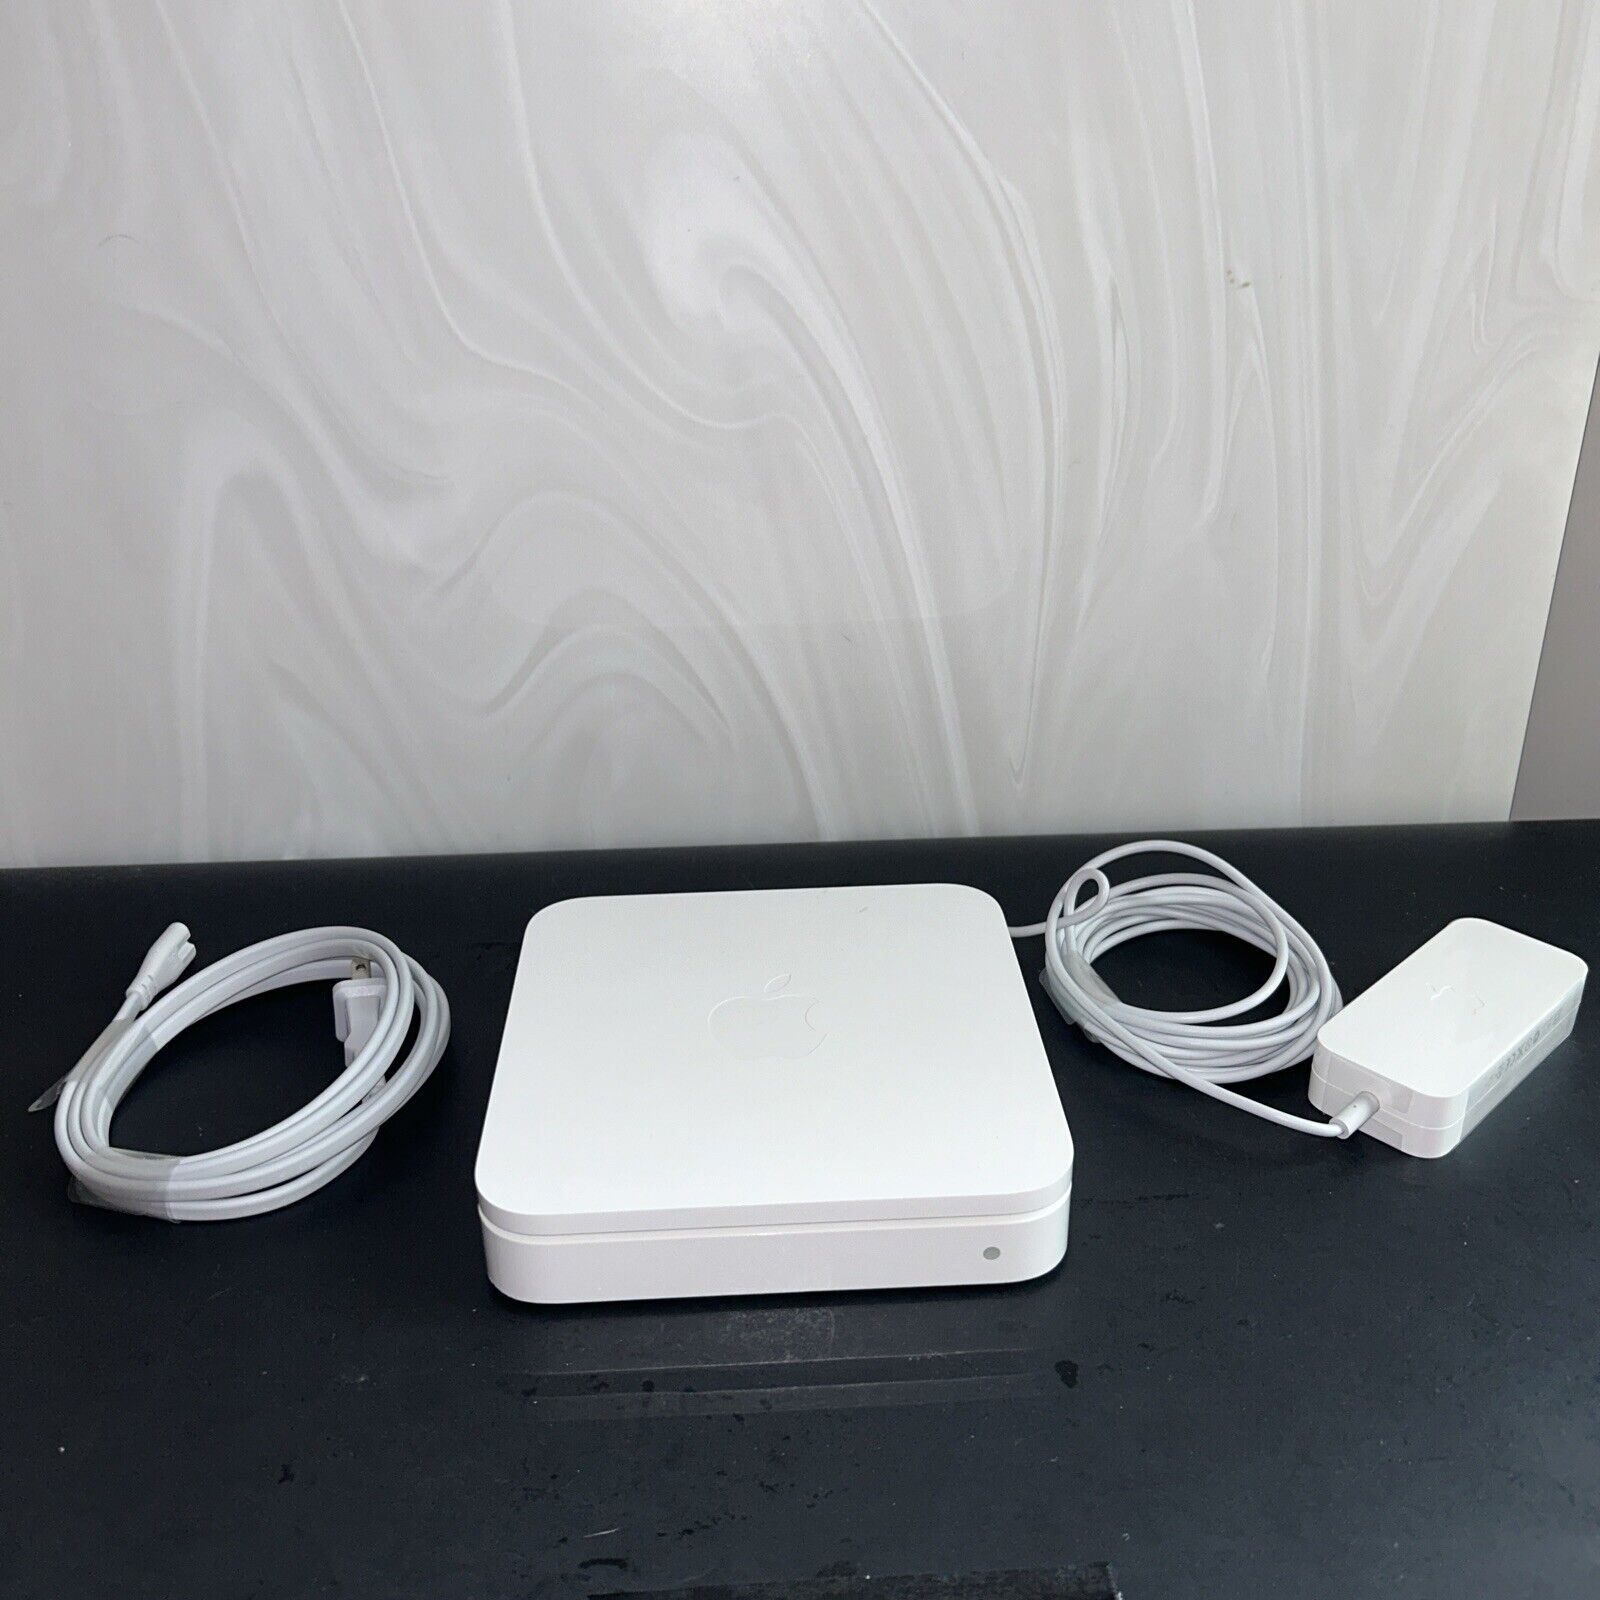 APPLE Wireless A1143 AirPort Express Wi-Fi Router Base Station Extreme Open Box